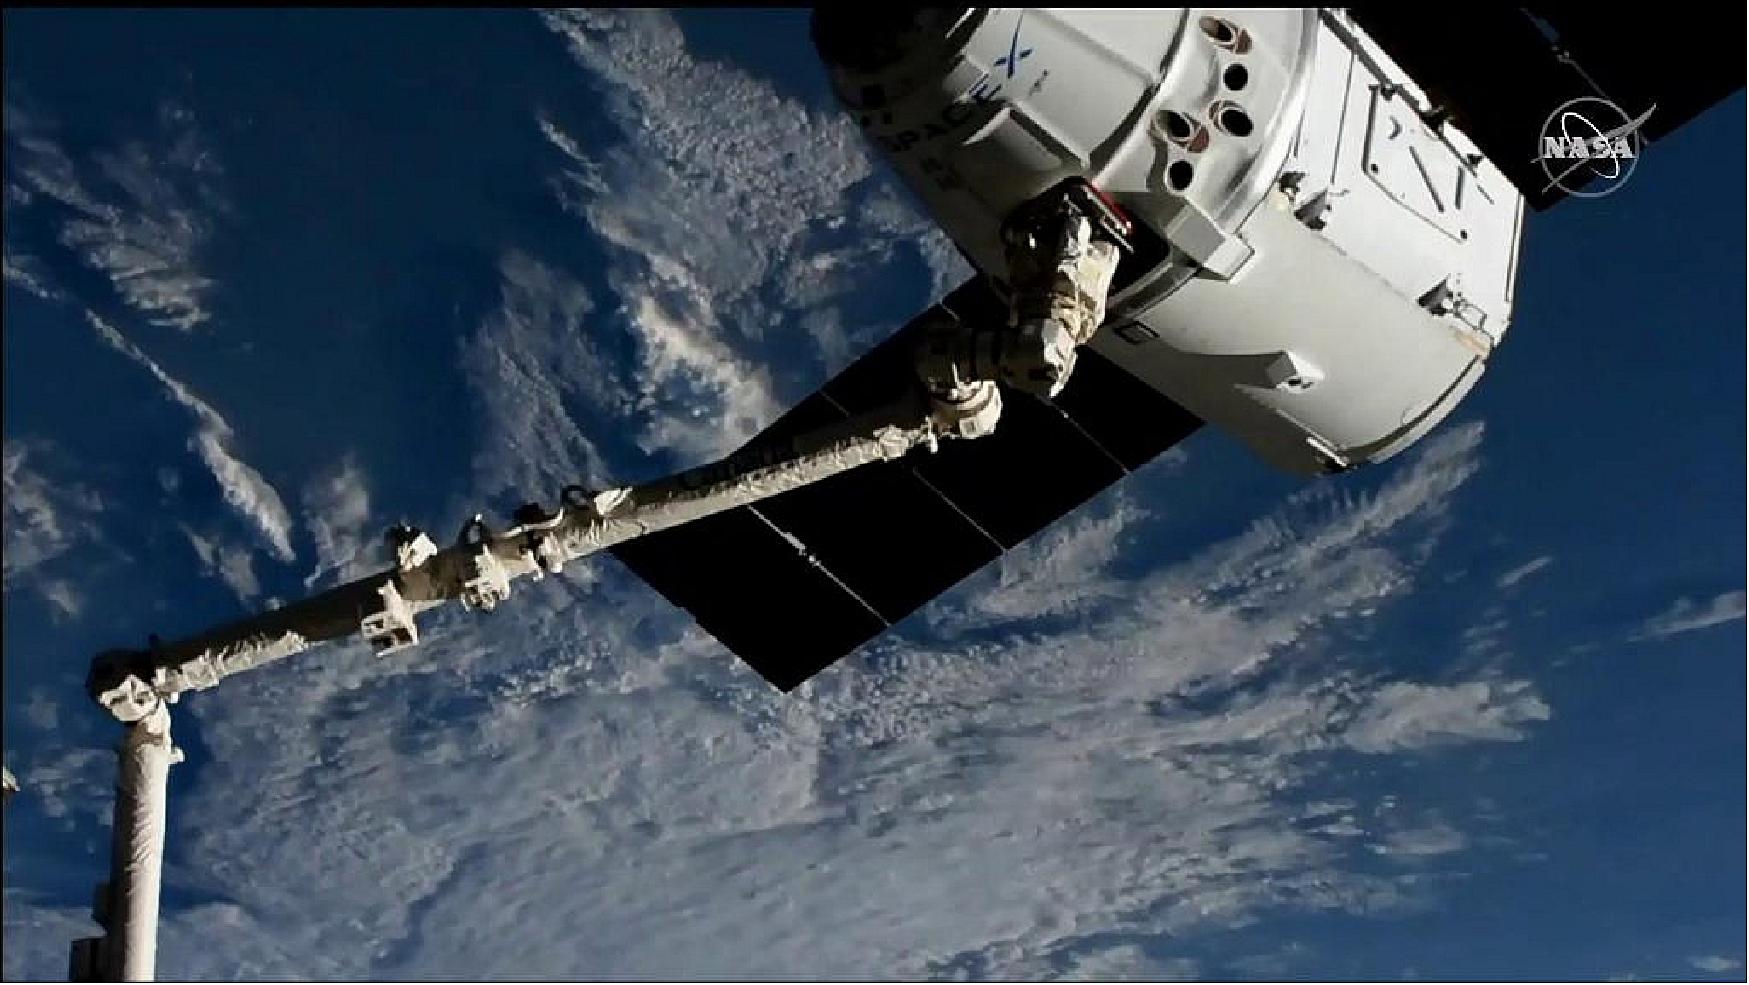 Figure 9: The SpaceX Dragon is in the grips of the Canadarm2 robotic arm shortly after it was captured over southern Chile (image credit: NASA)